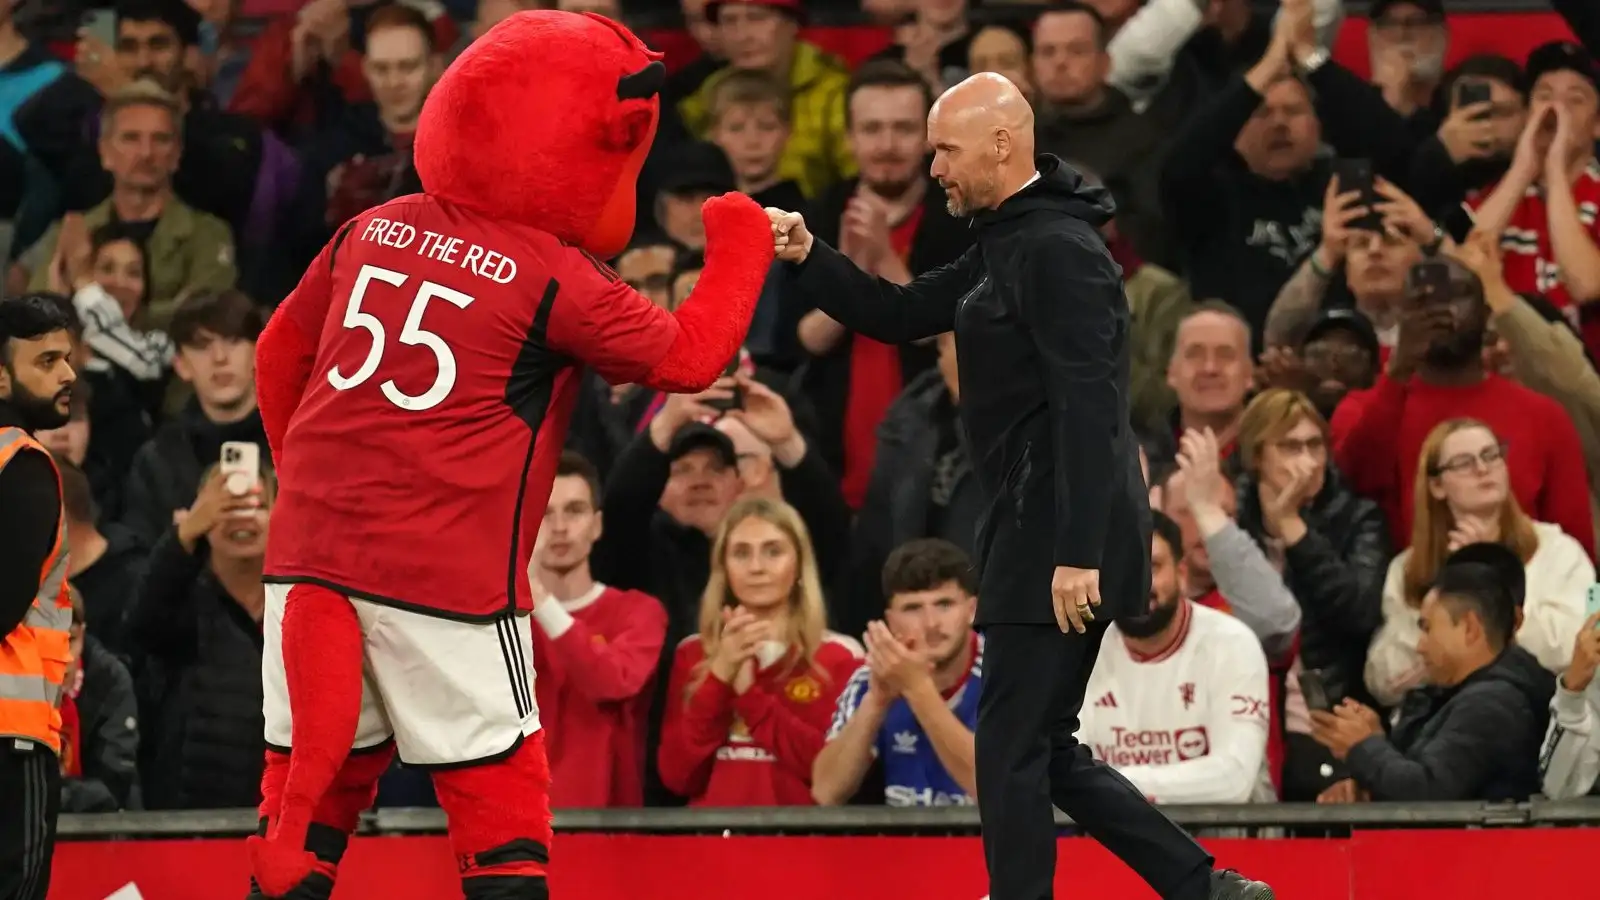 Erik ten Hag bumps fists with Manchester United mascot Fred the Red.